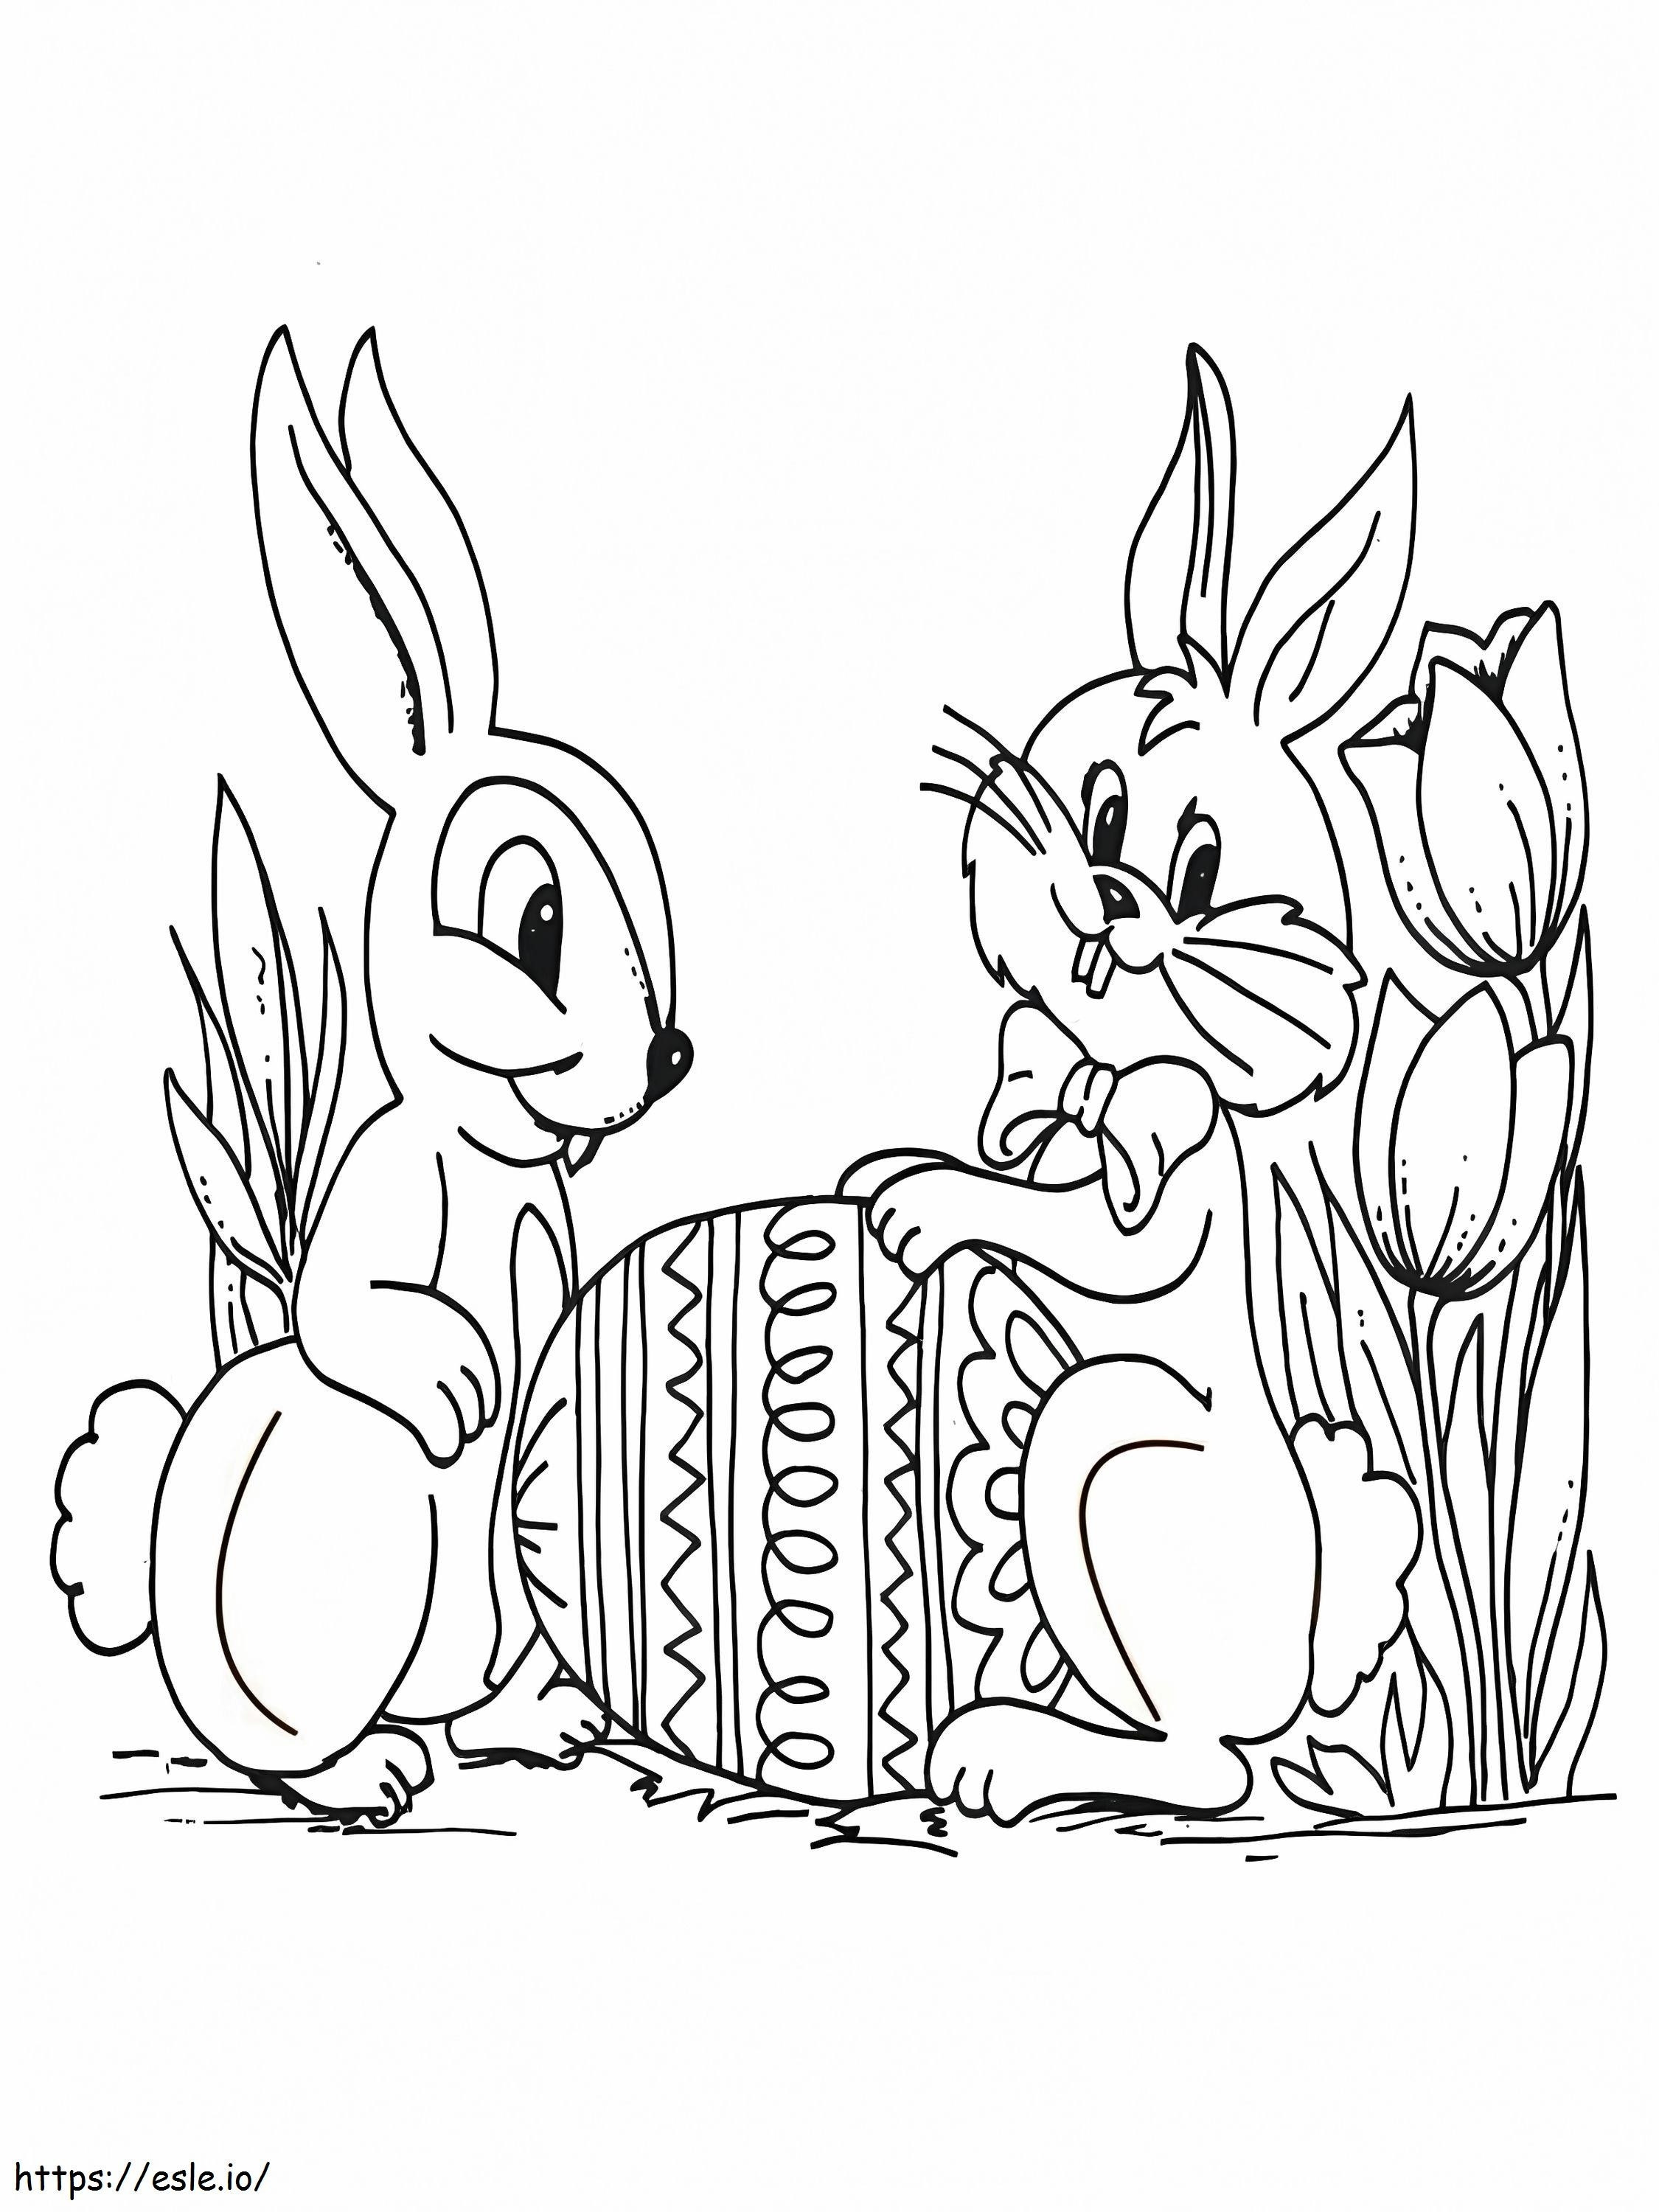 Two Easter Bunnies Talking coloring page